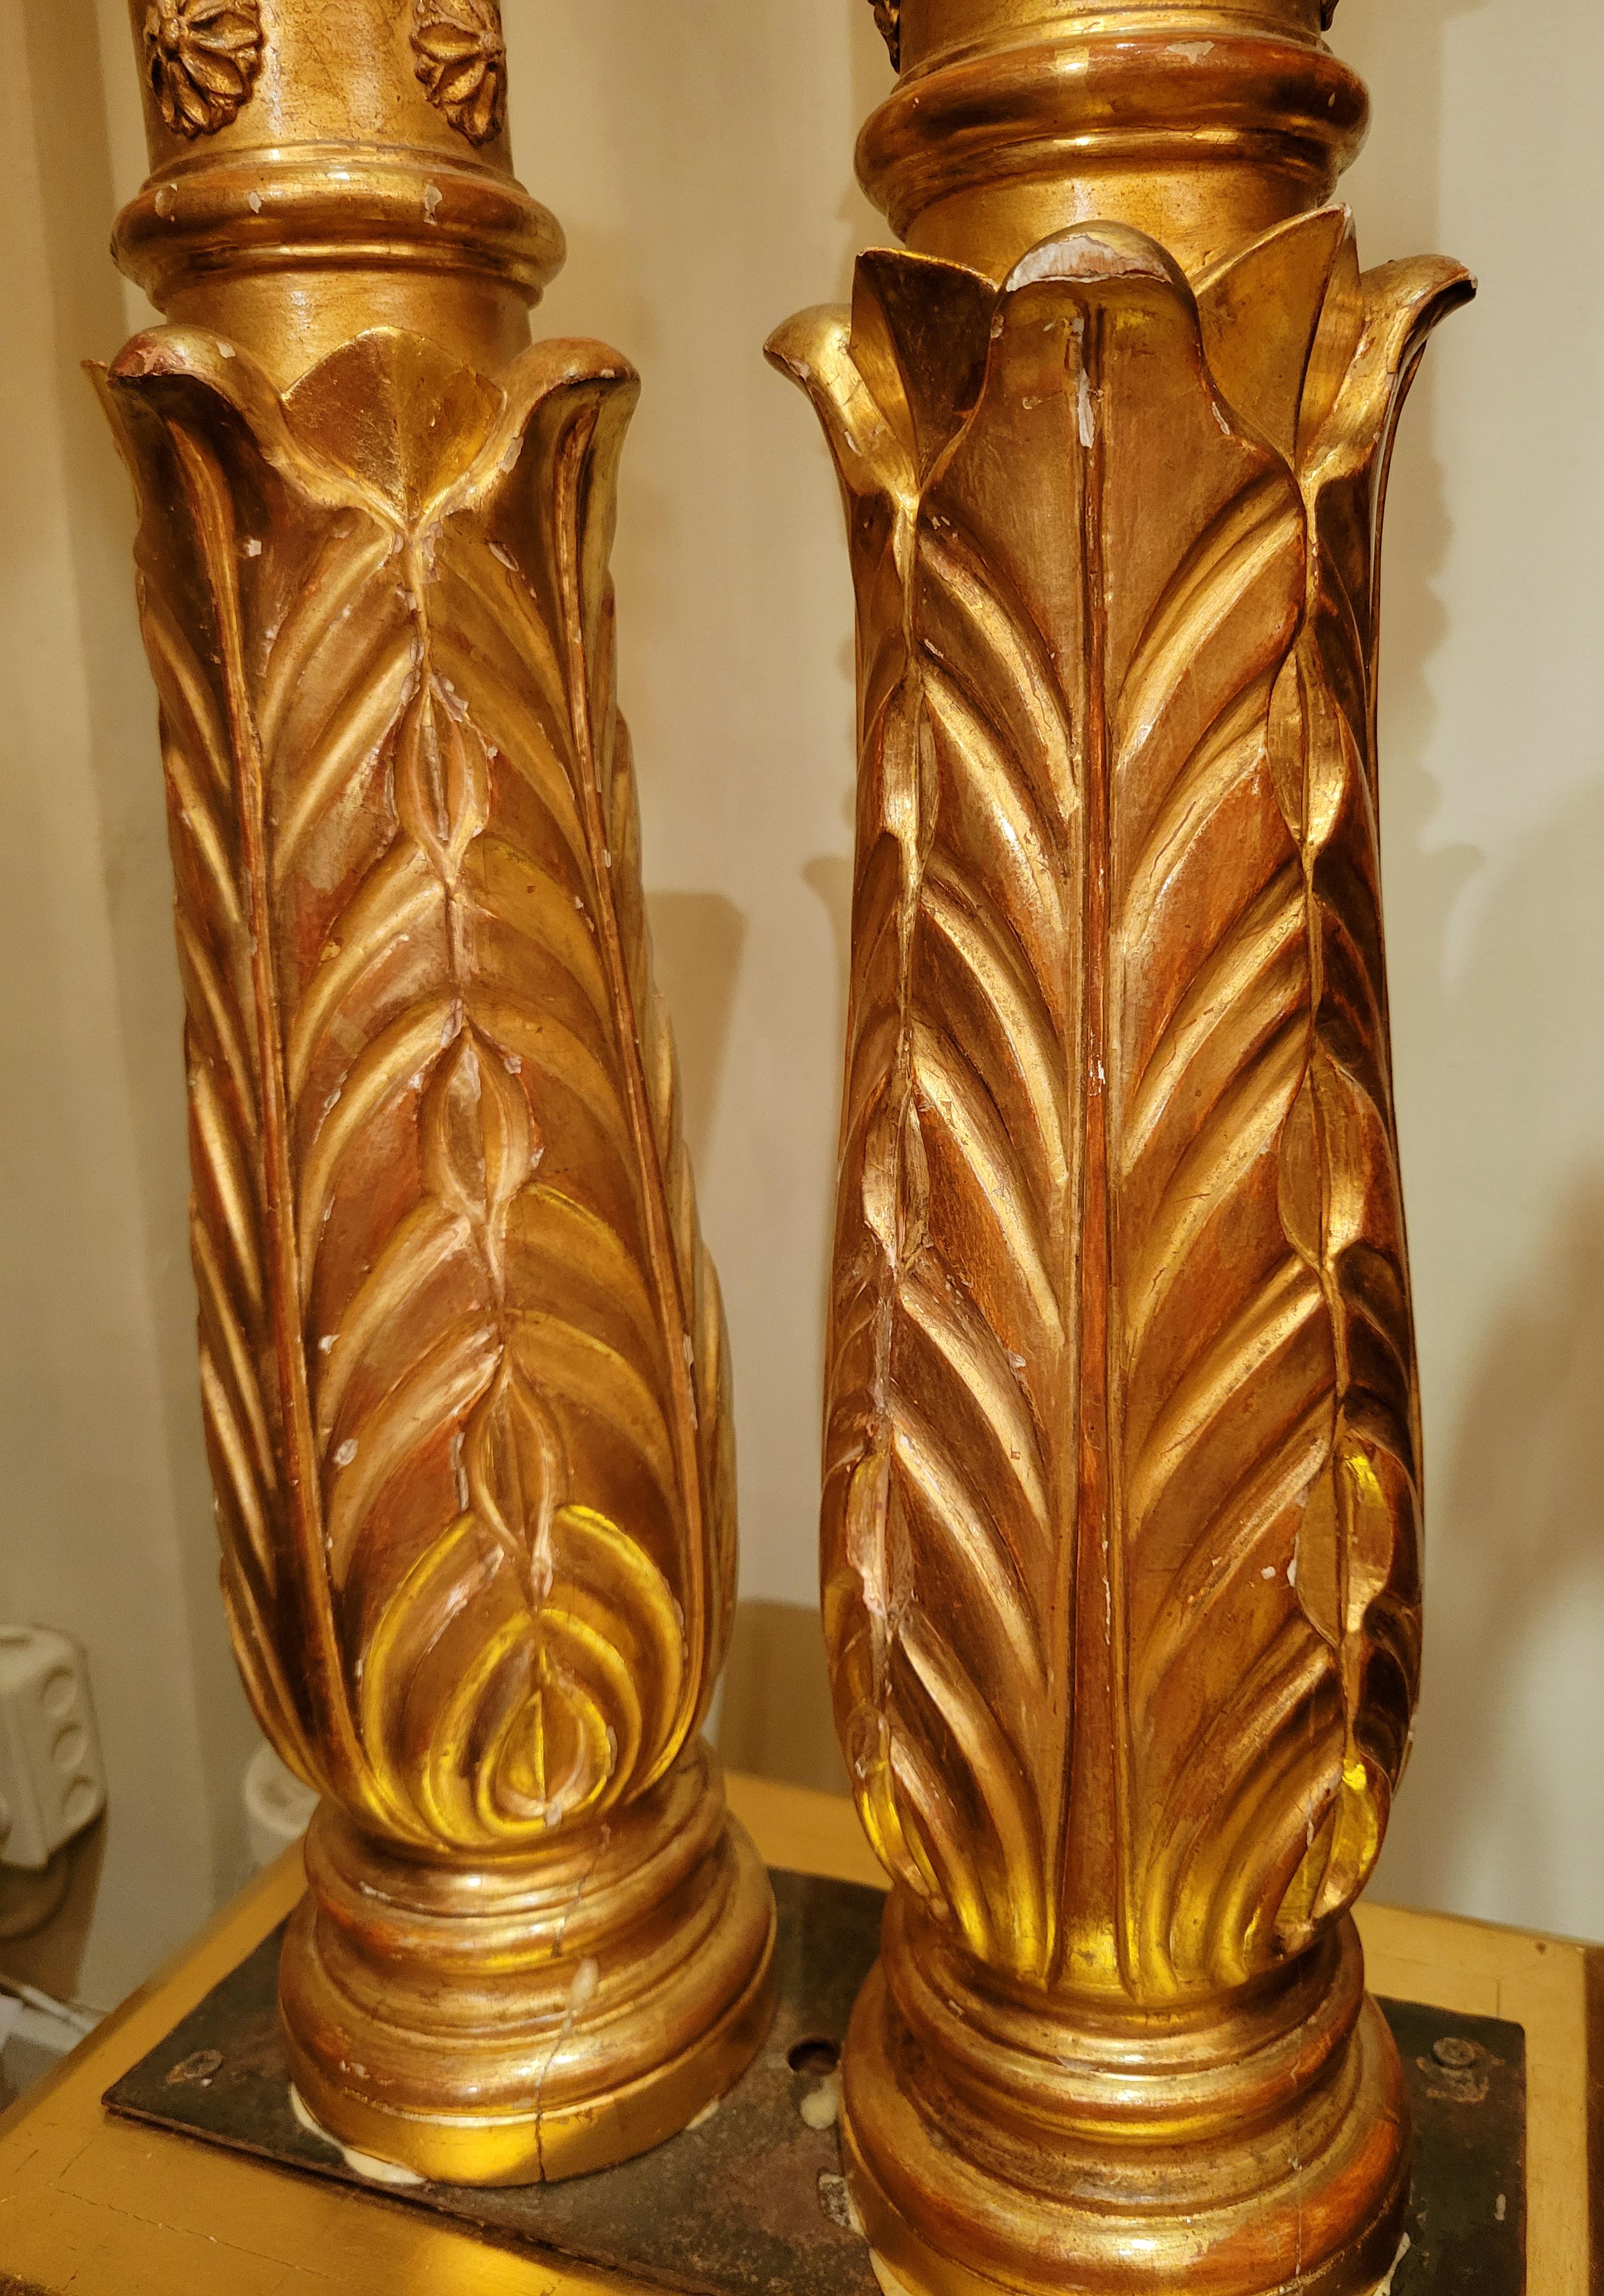 Set of 4 Antique 19th Century Florentine Gold Columns, circa 1850 In Good Condition For Sale In New Orleans, LA